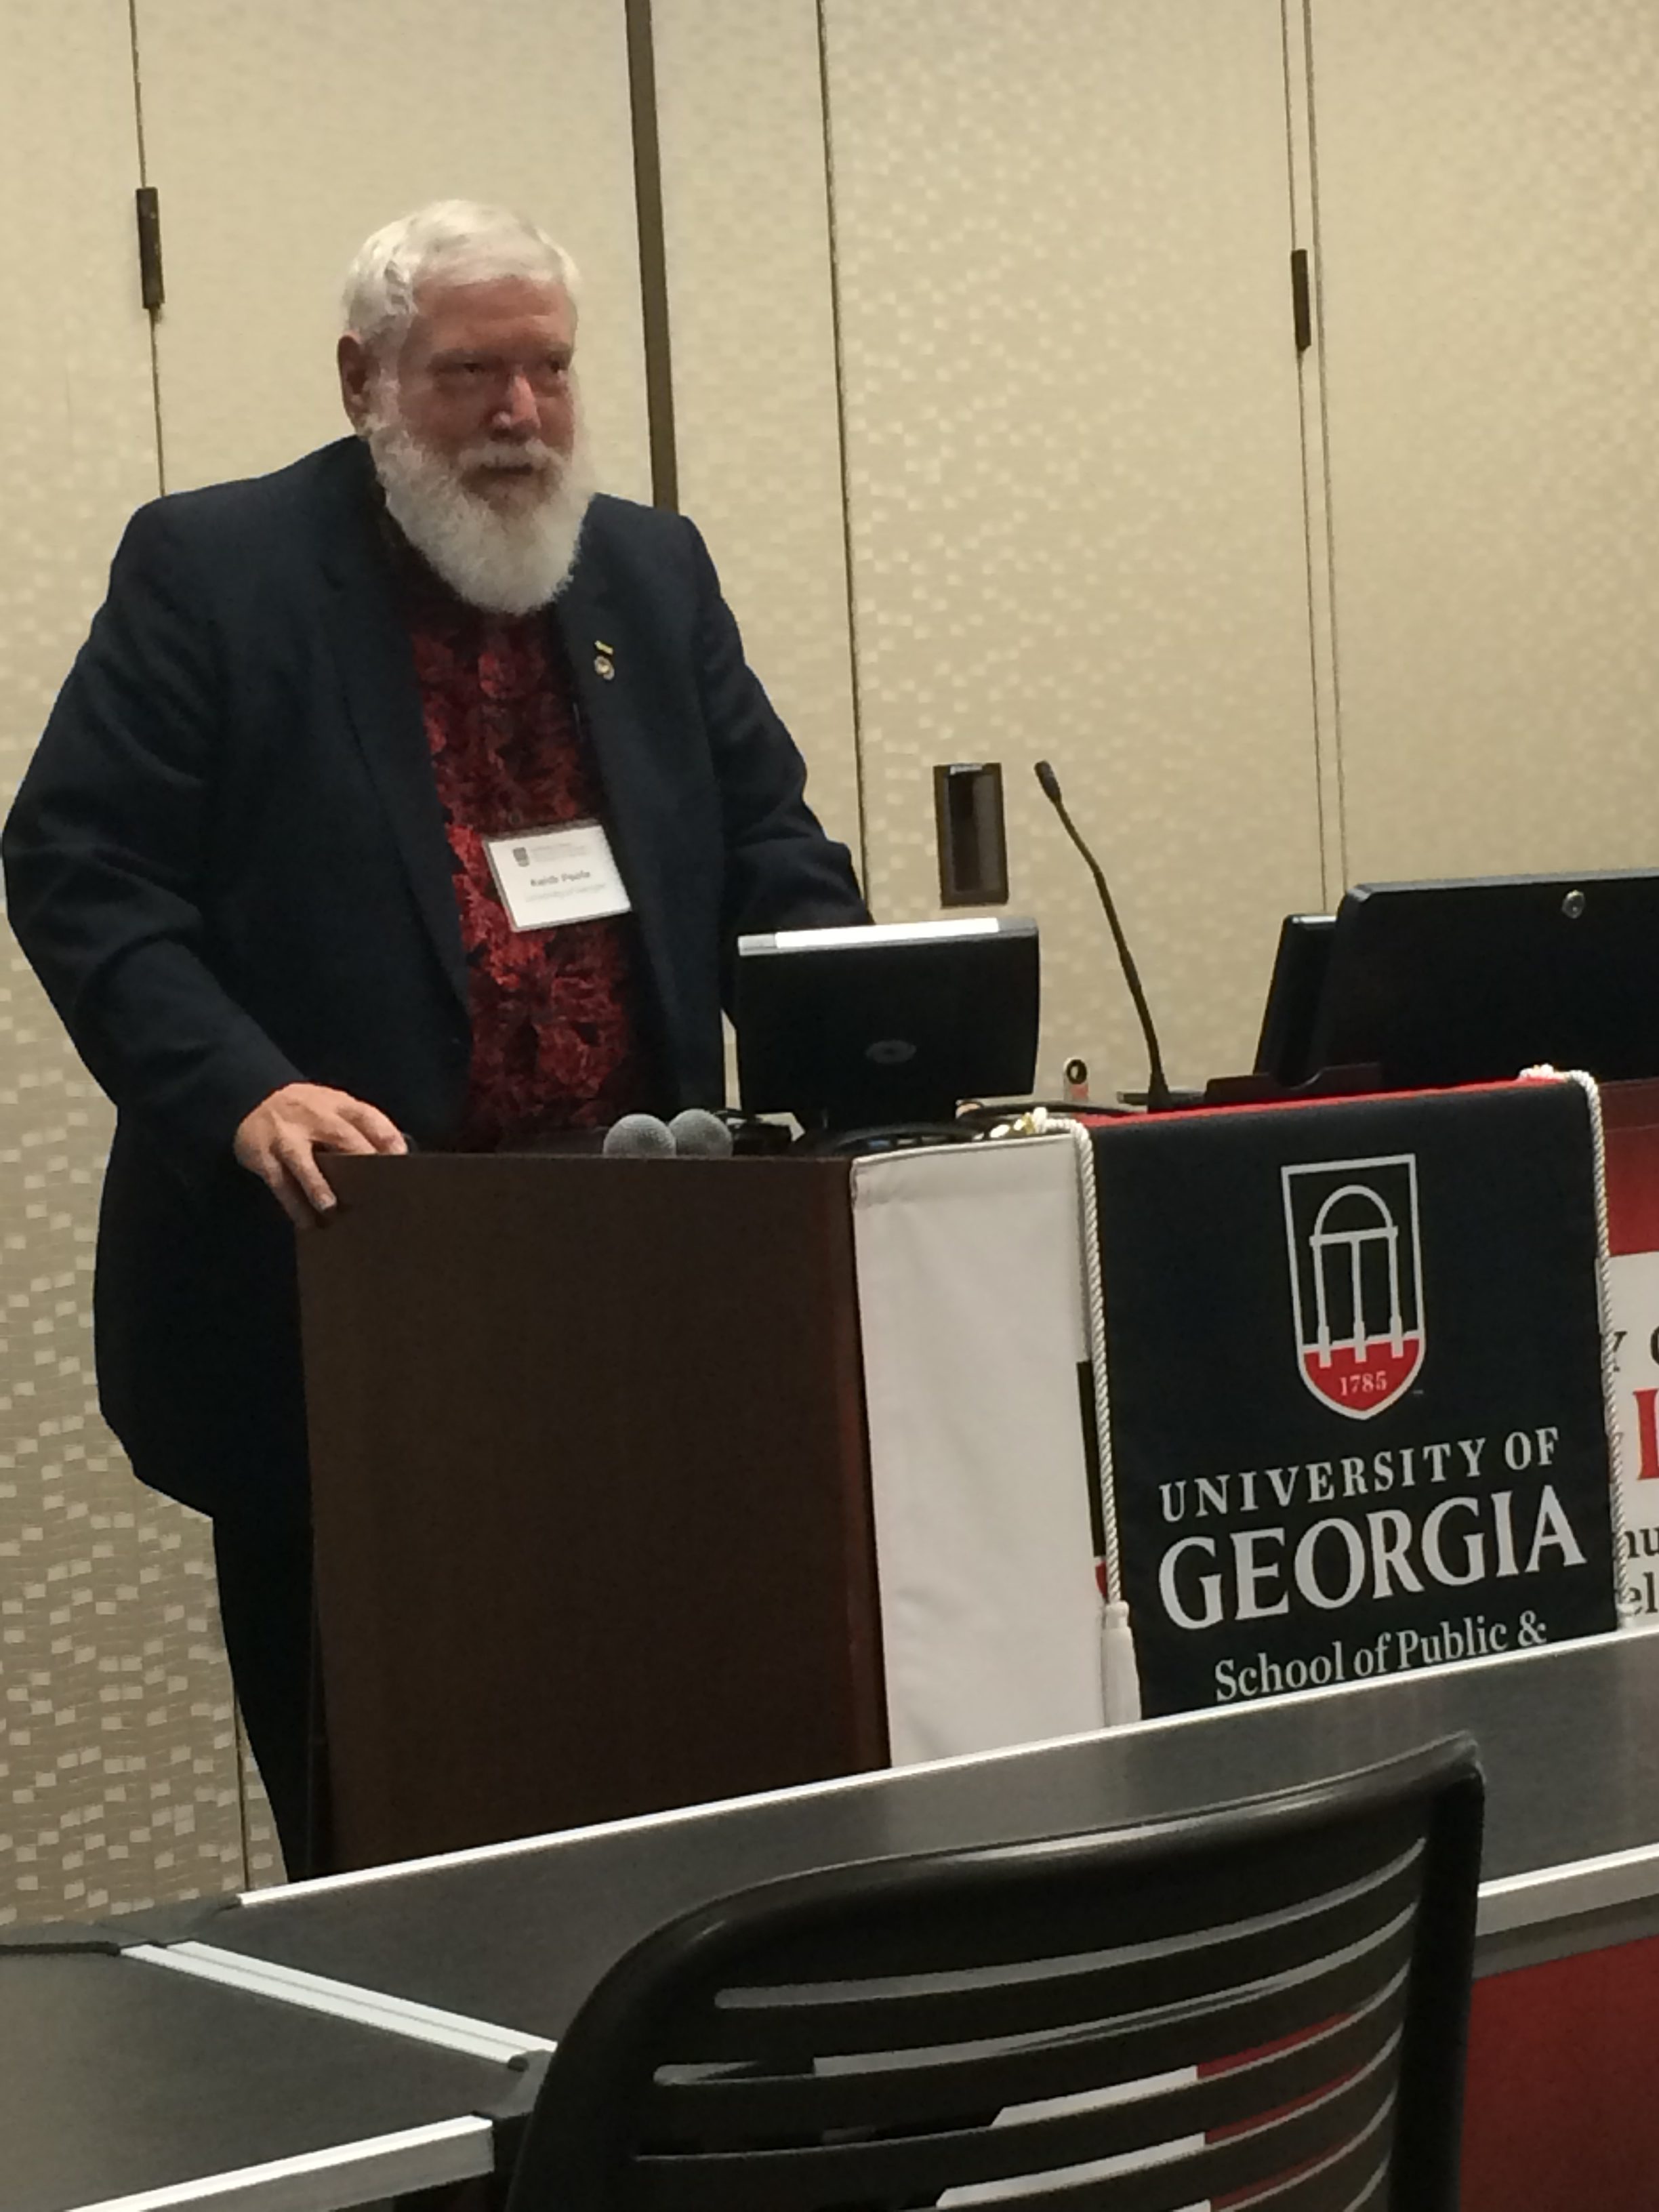 Scholars honor UGA’s Keith Poole, who tracked the rise of political polarization